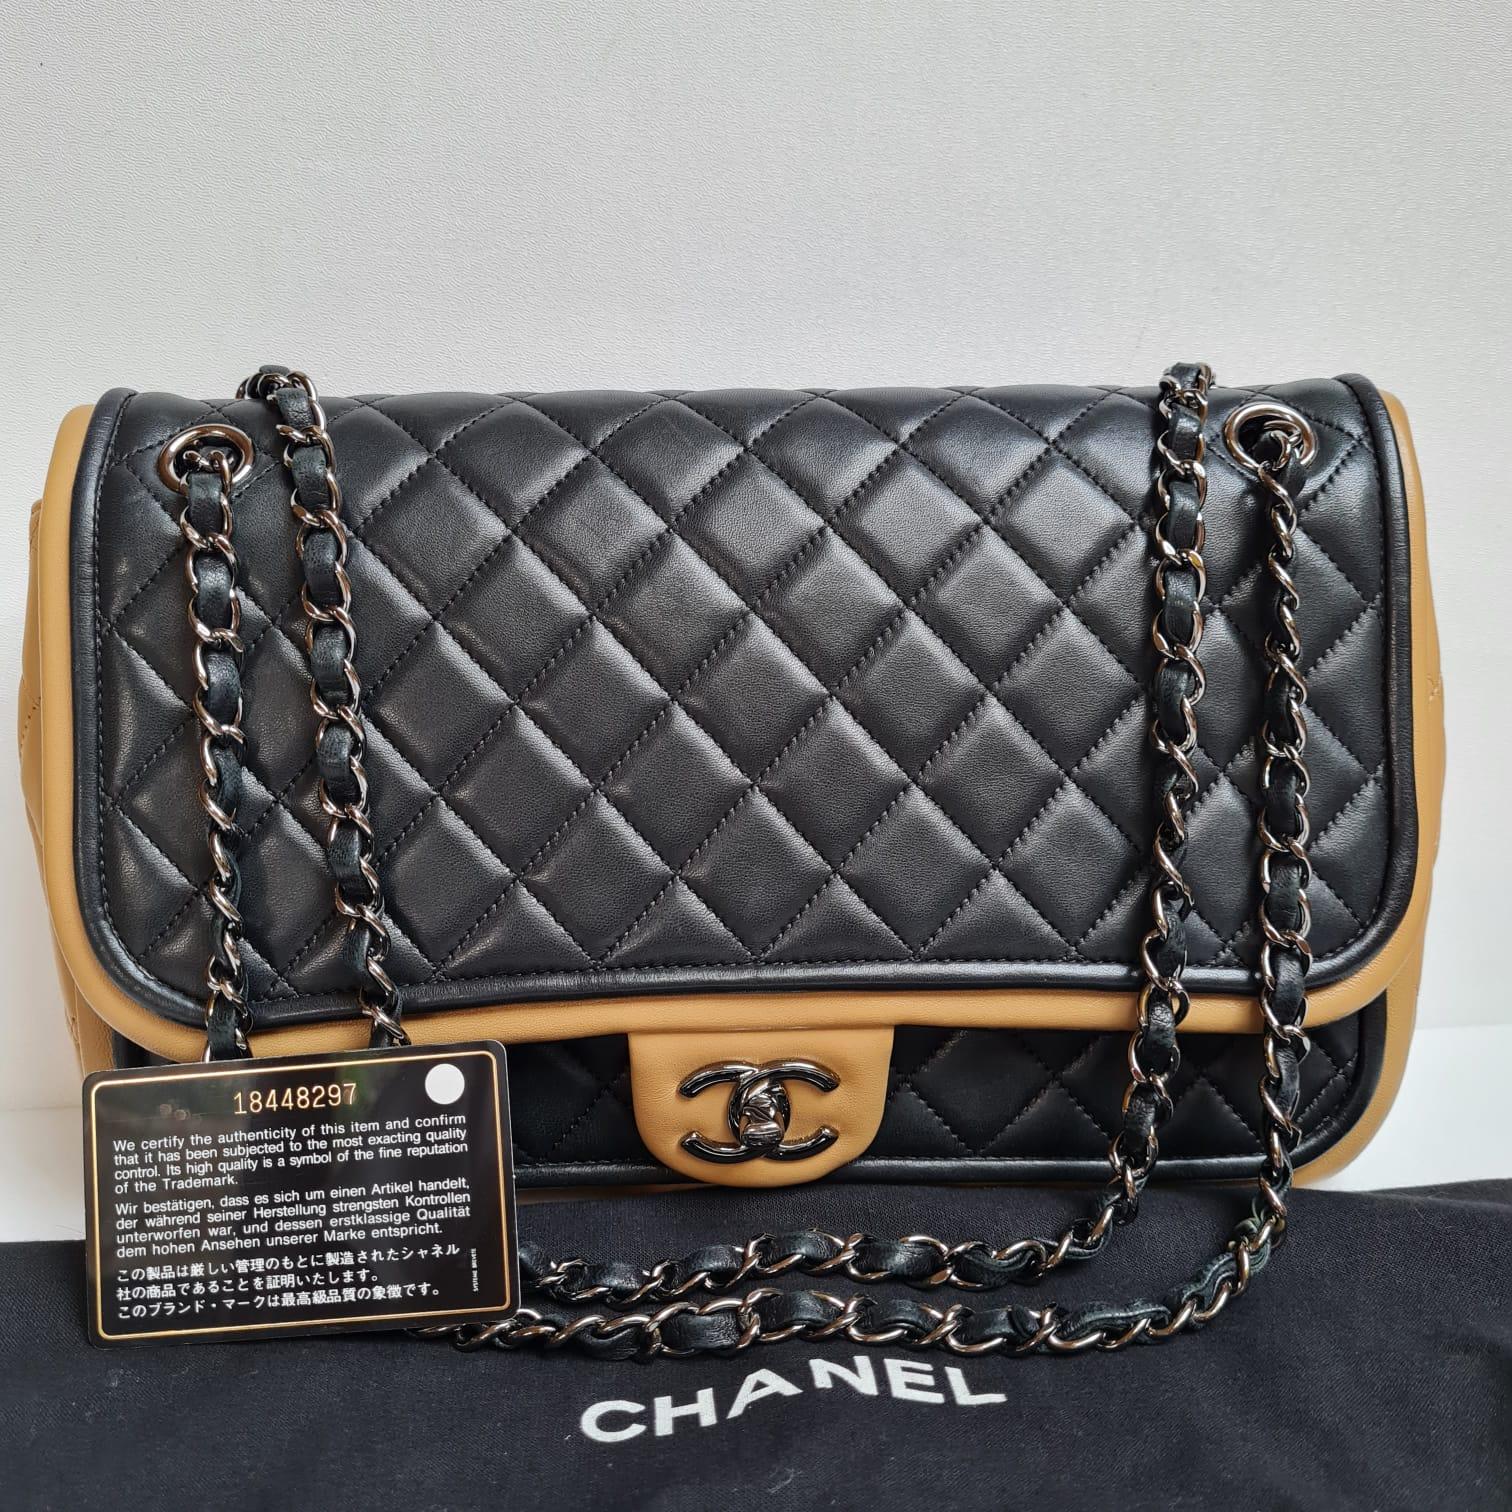 Beautiful chanel twist jumbo in black and beige. Overall in great condition throughout, with very minor scuffing due to leather surface. Faint scuffing on the flap leather lining as well. Comes with its card and dust bag. Series #18.